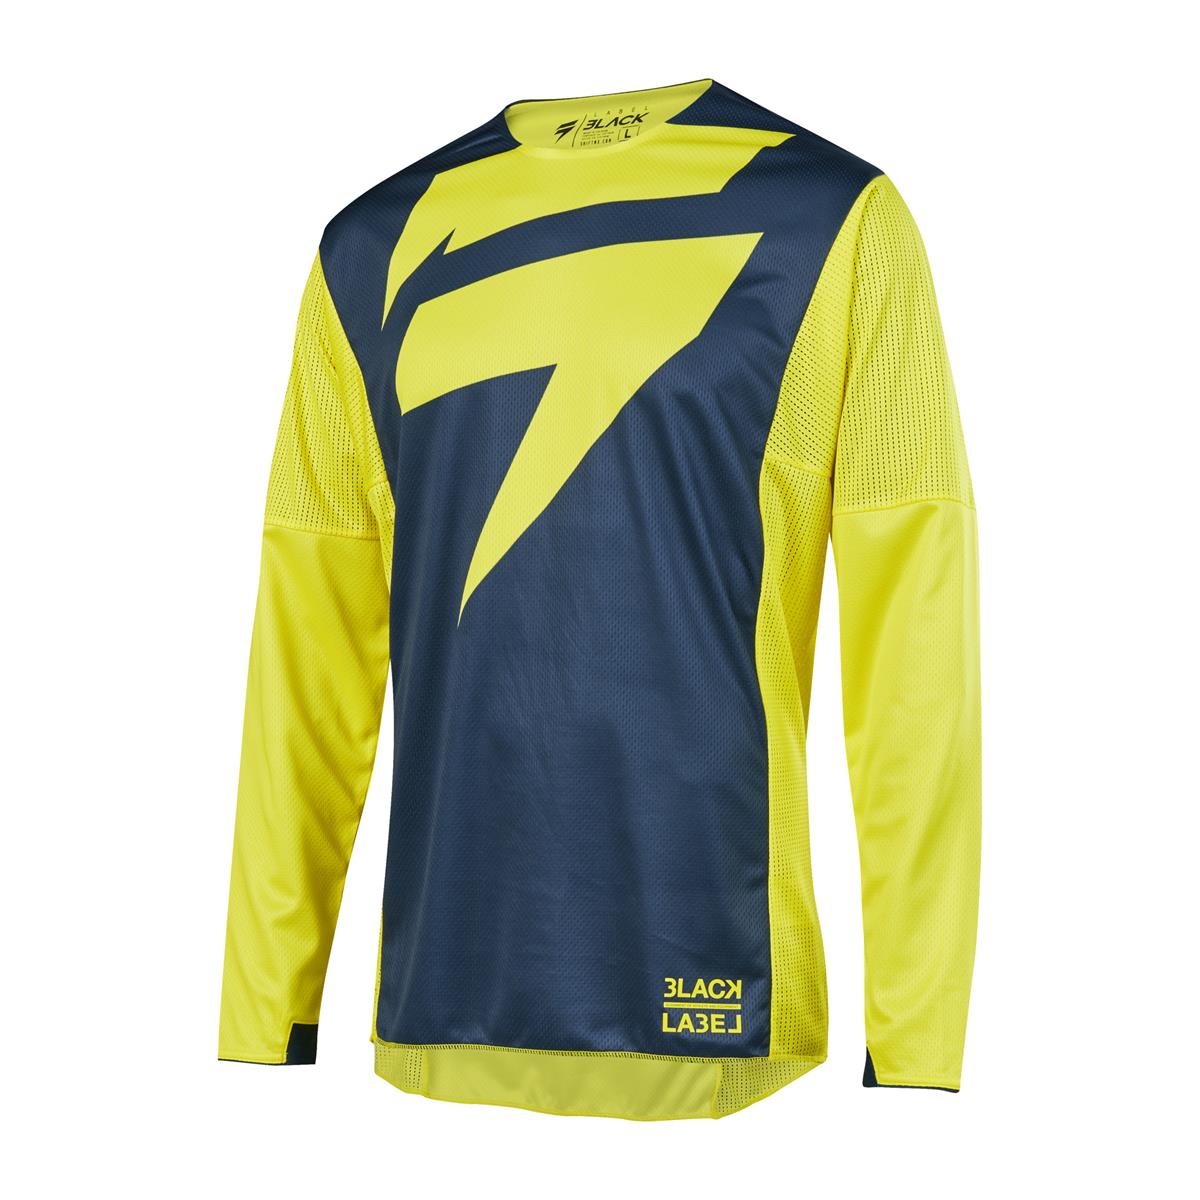 Shift Maillot MX 3lack Label Mainline Yellow/Navy